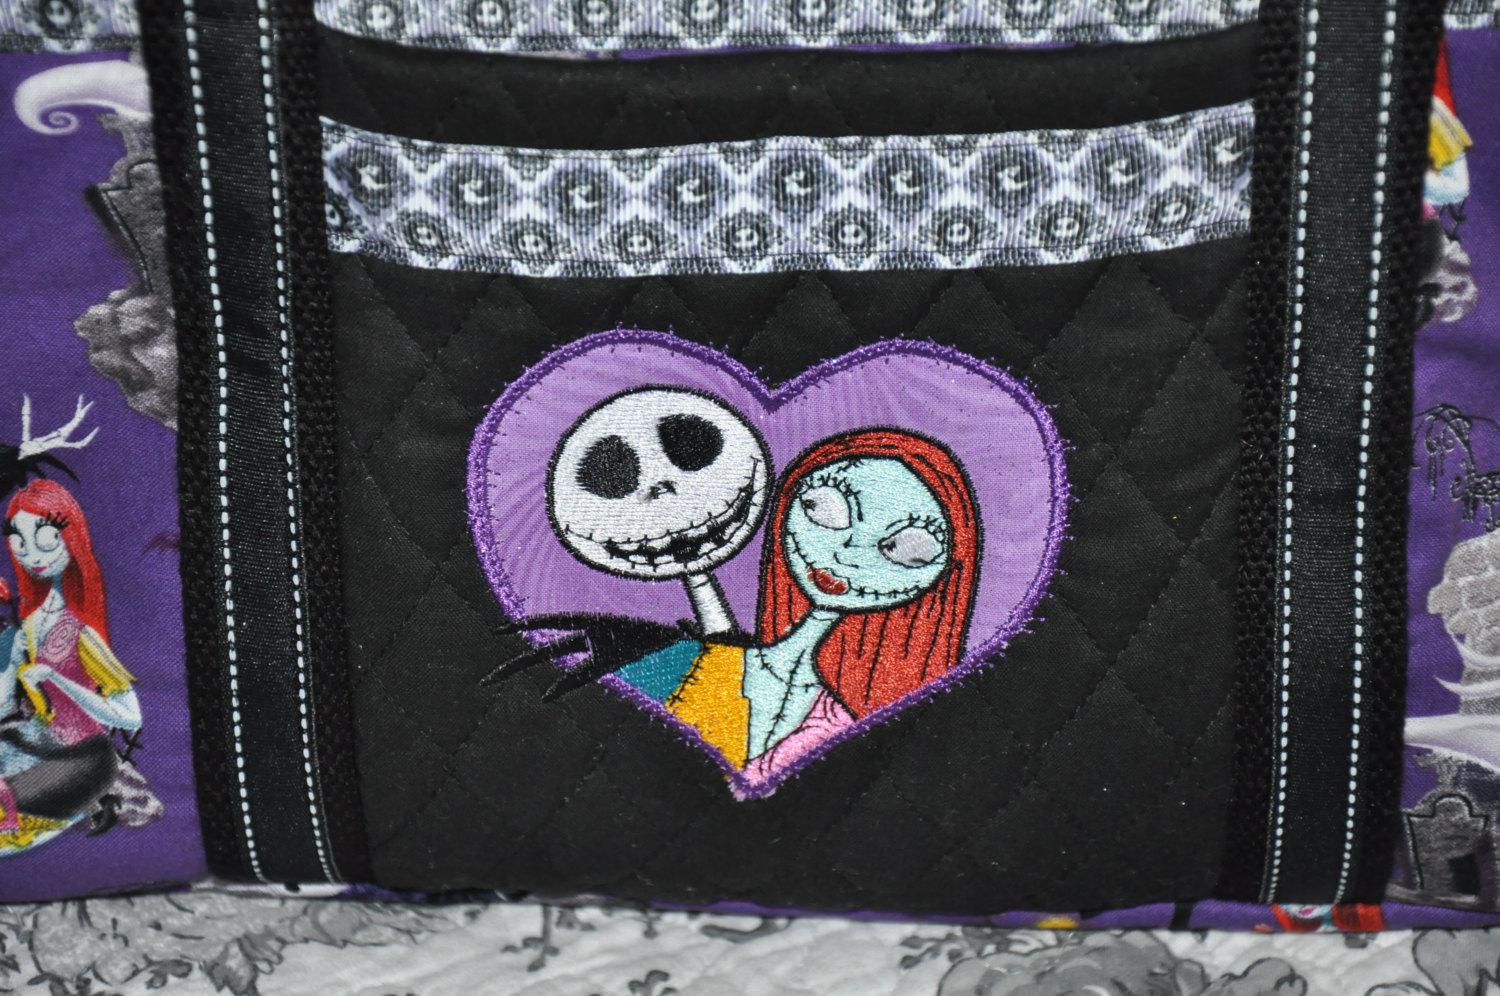 A bag with Jack and Sally from Nightmare Before Christmas design (closer look)